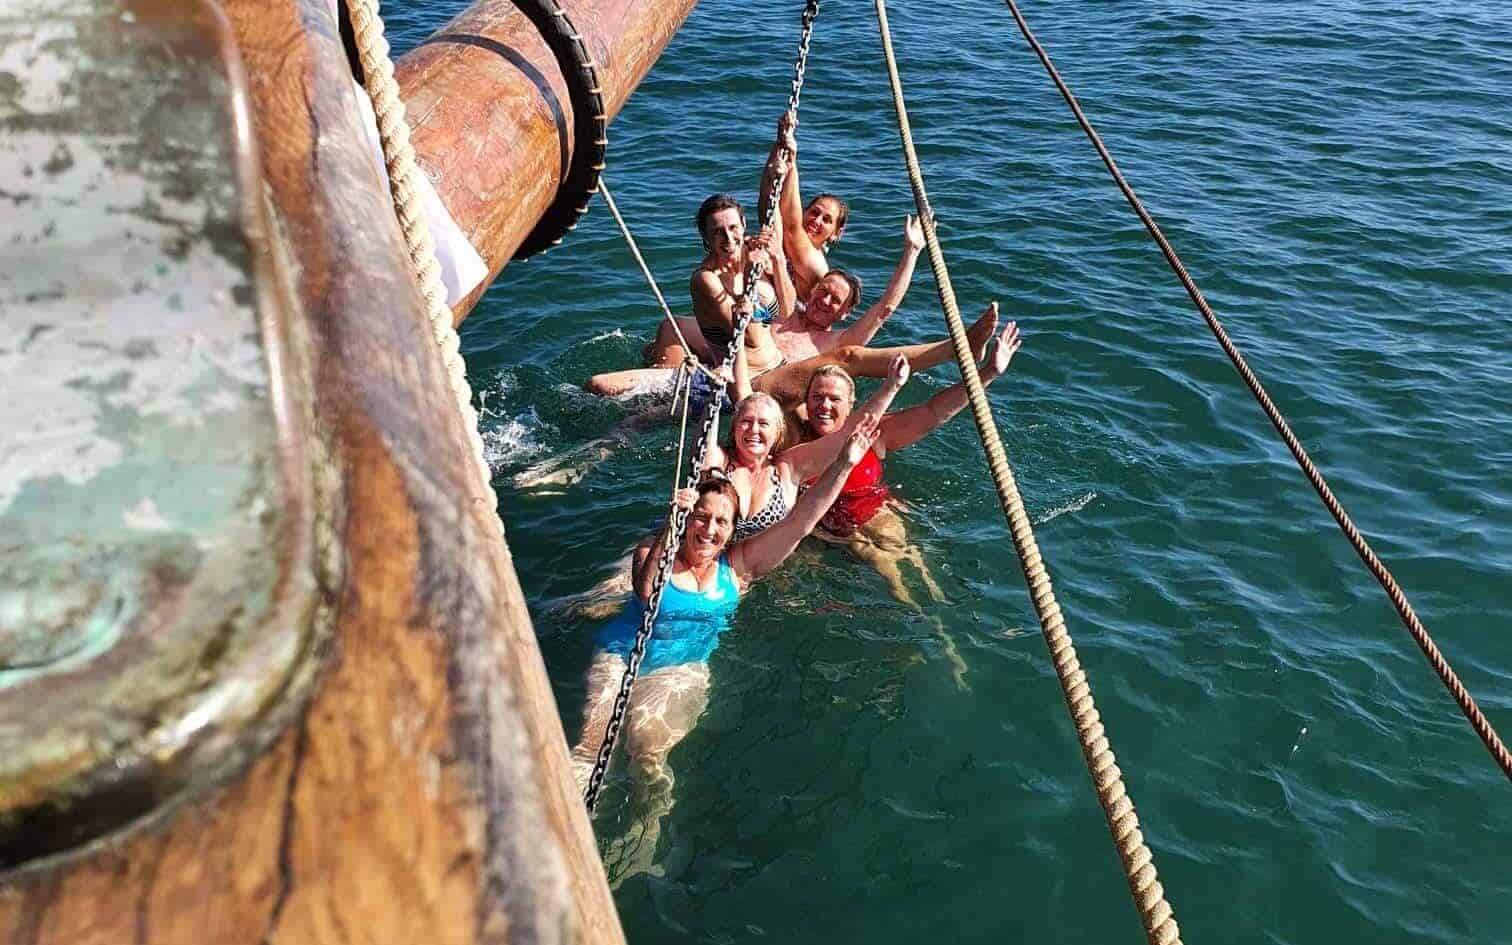 Blue health is the understanding of how water-based environments positively impact our mental, physical, and emotional wellbeing. Spending time at sea - especially aboard a traditional sailing vessel - ticks all of these boxes. We have been offering sailing holidays that reap the benefits of Blue Health since 1996!